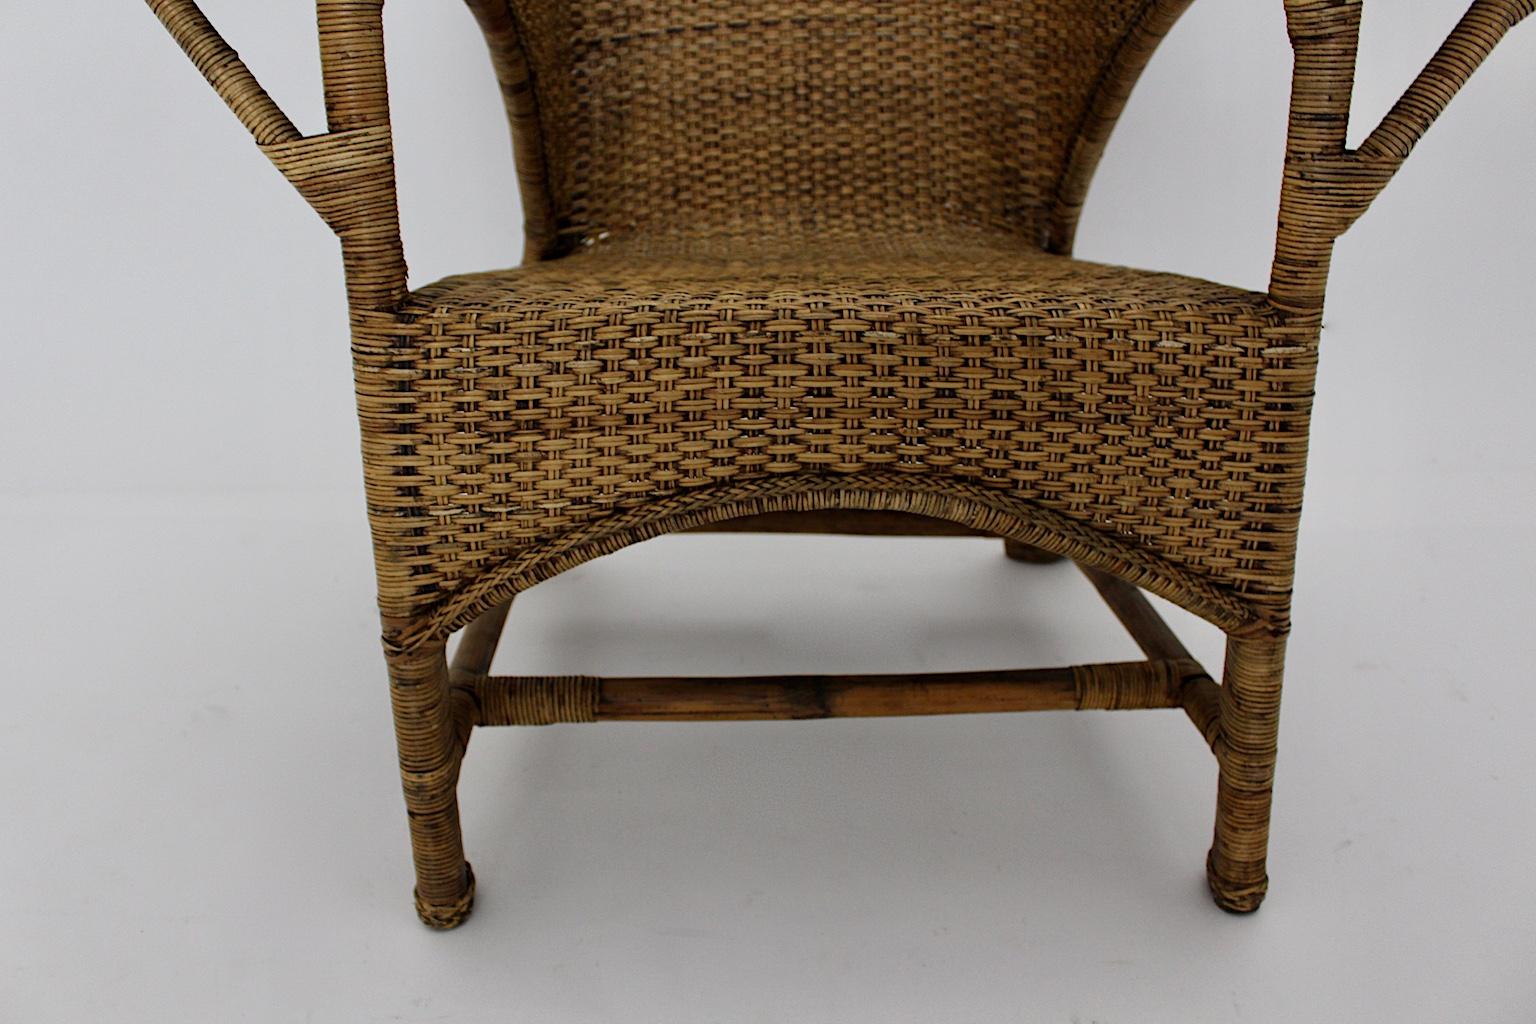 20th Century Organic Arts & Crafts Vintage Wicker Rattan Armchair Dryad and Co circa 1910 UK For Sale